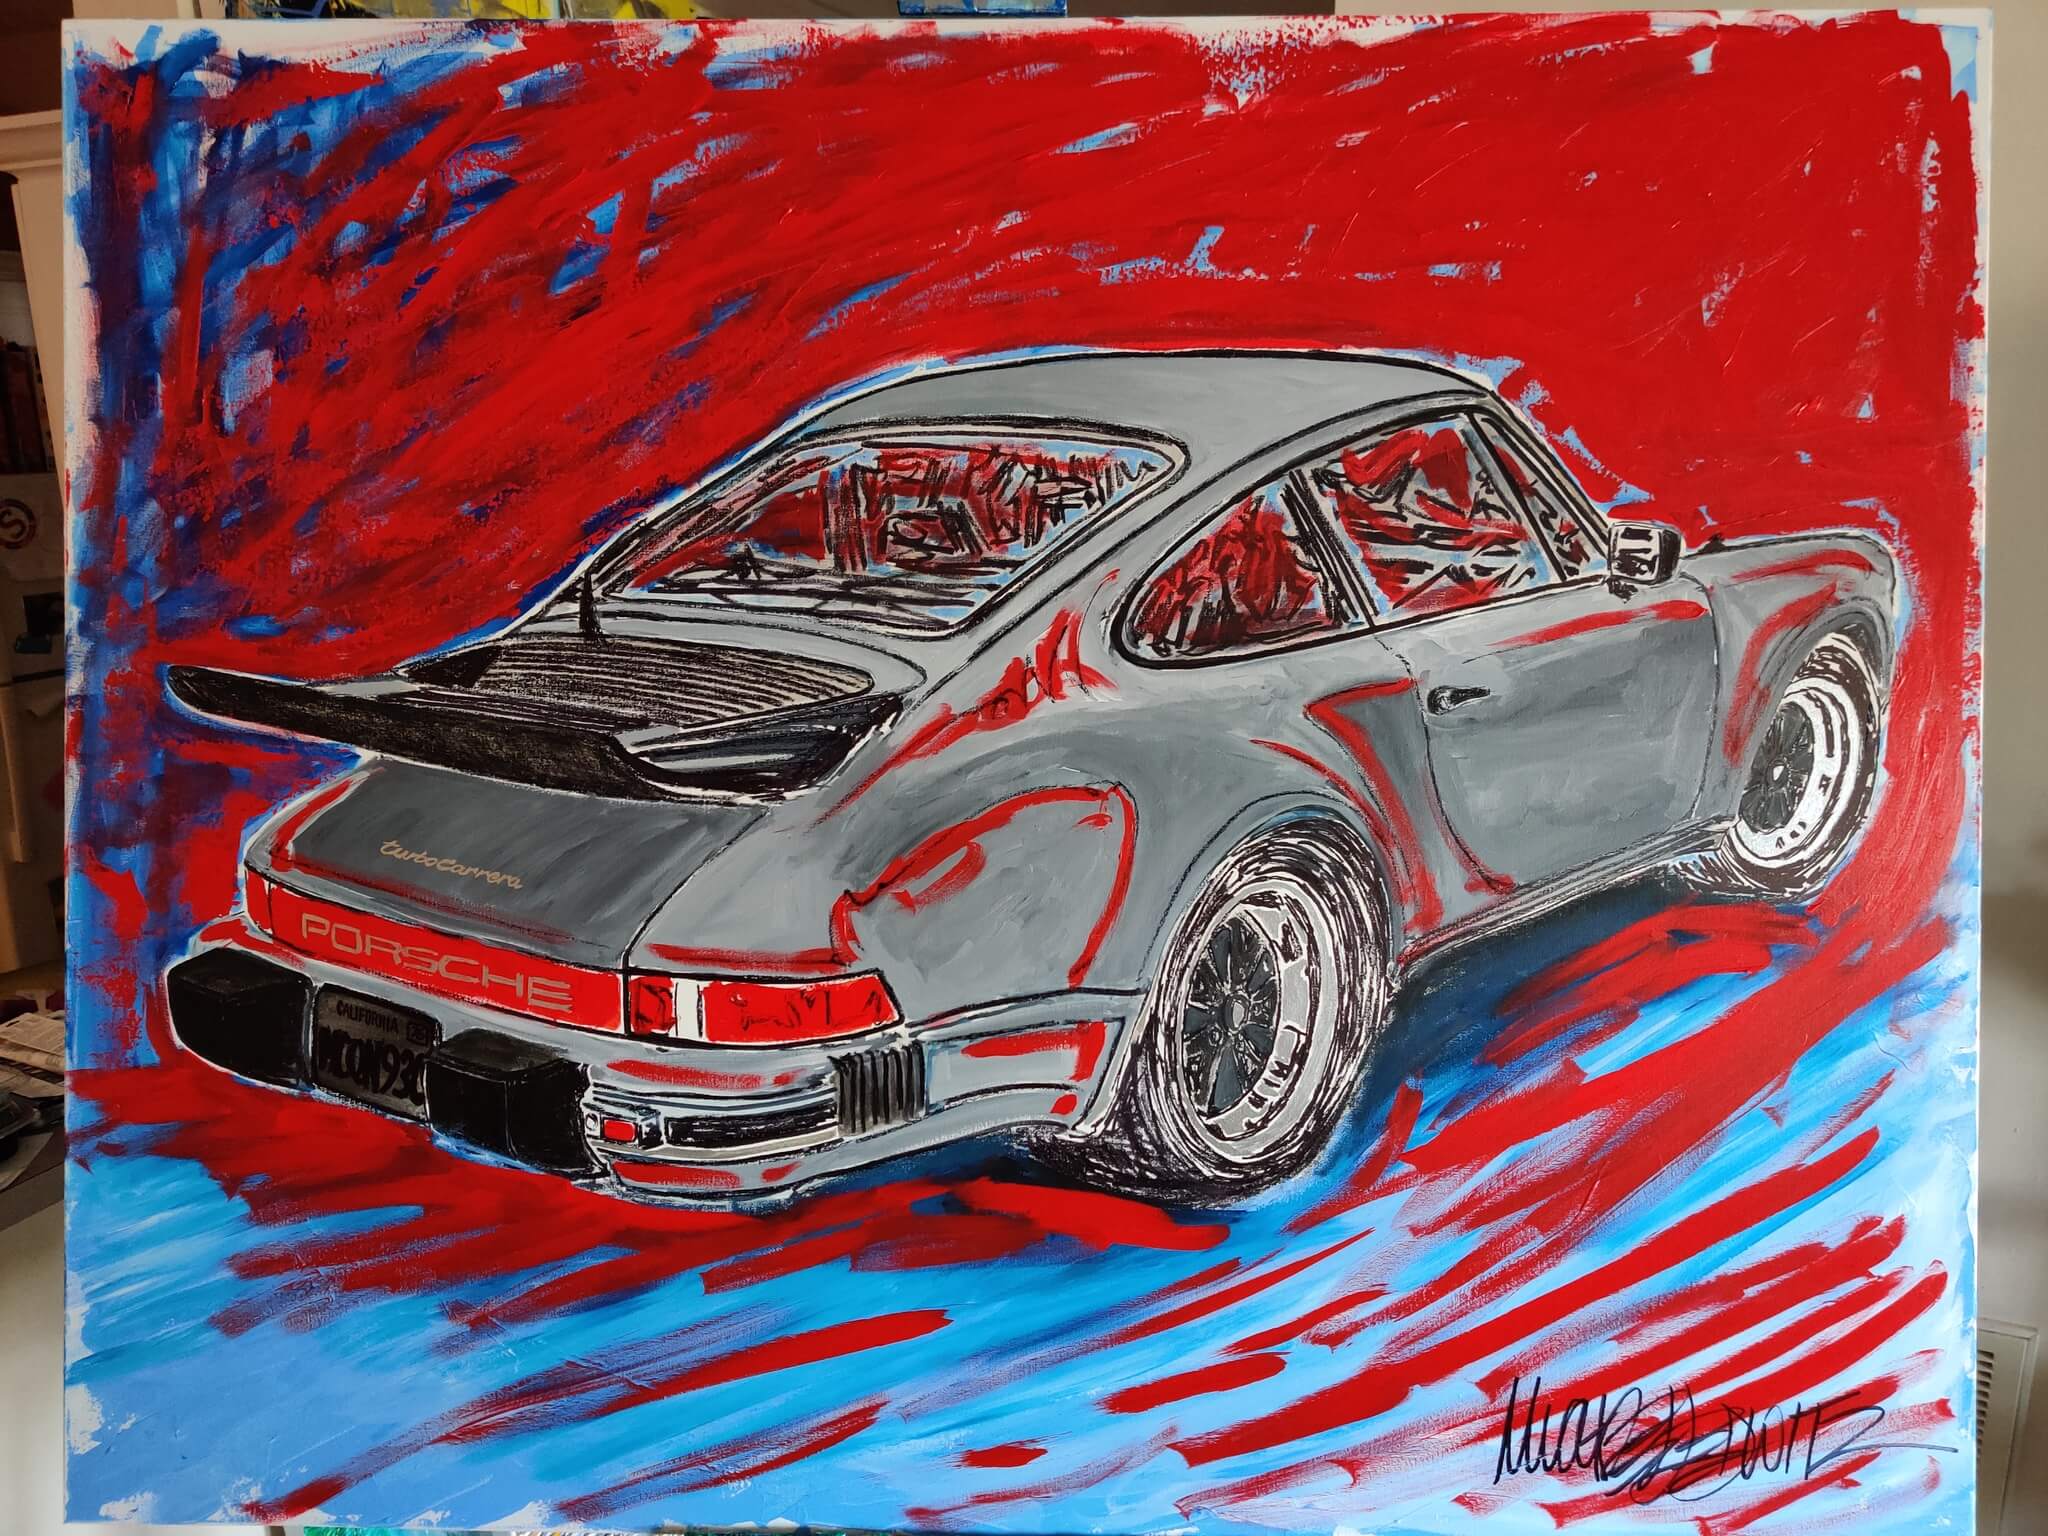 "McQueens 930" Painting by Michael Ledwitz